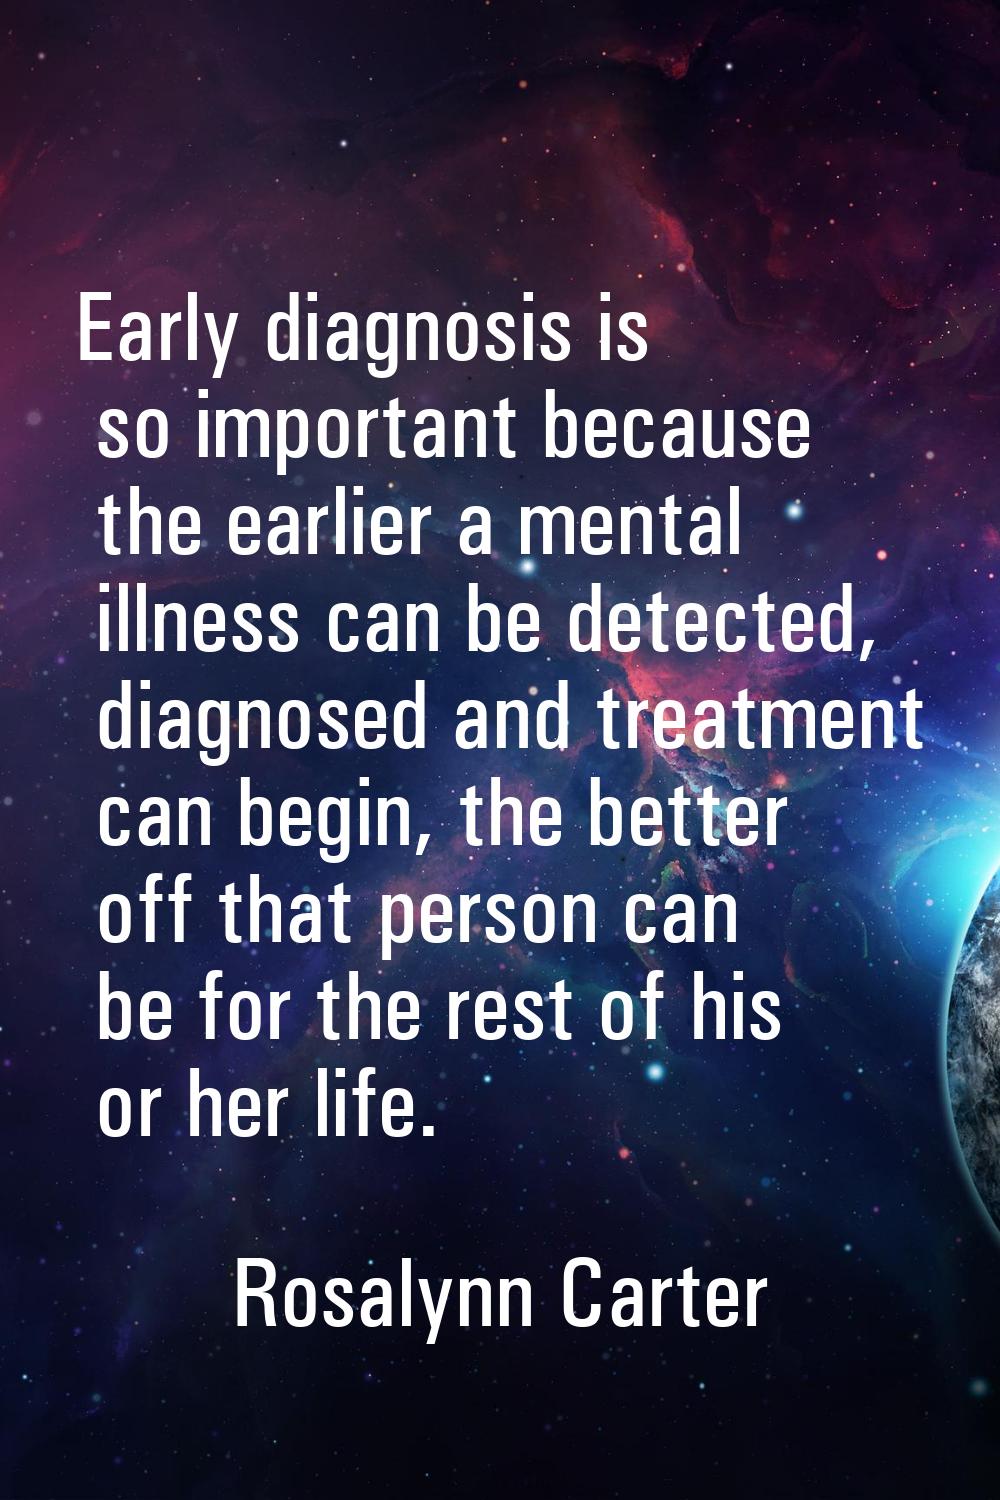 Early diagnosis is so important because the earlier a mental illness can be detected, diagnosed and